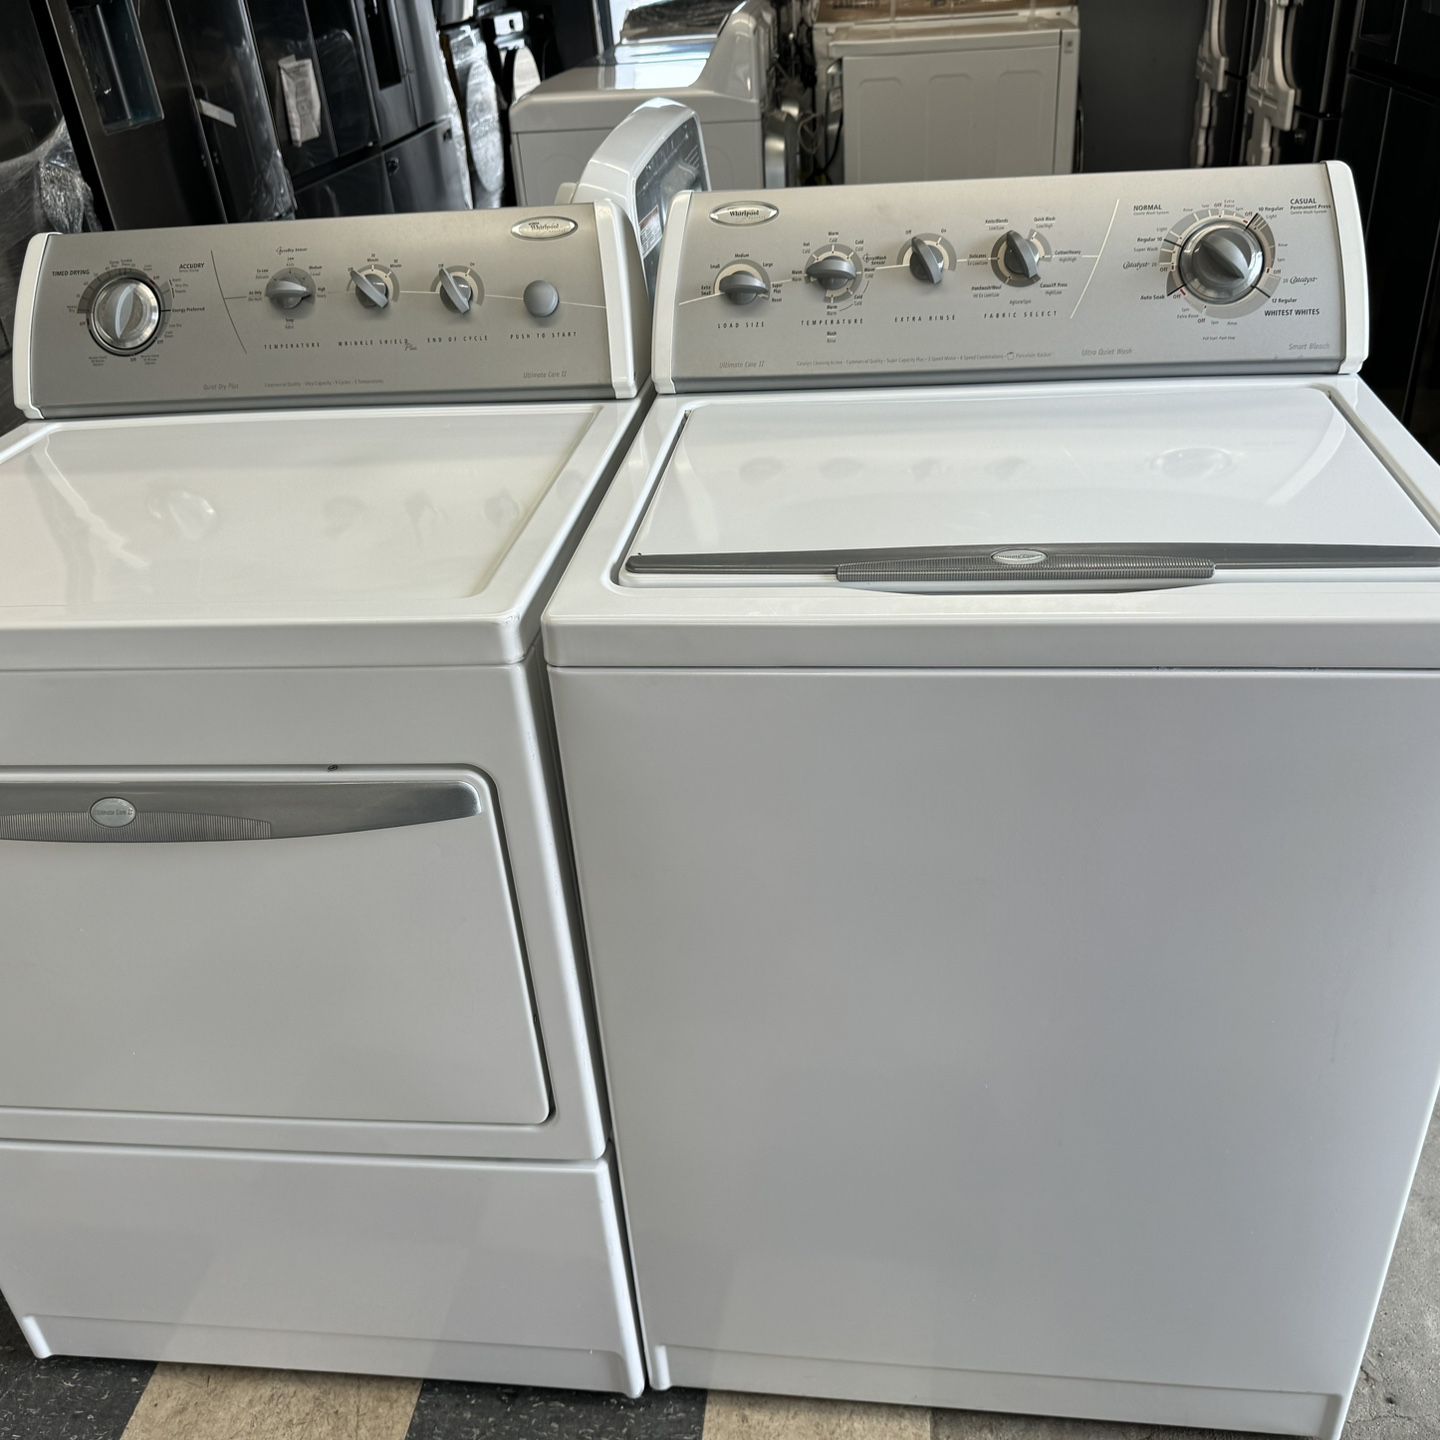 Whirlpool Washer And Dryer Set $650 Or Best Offer 